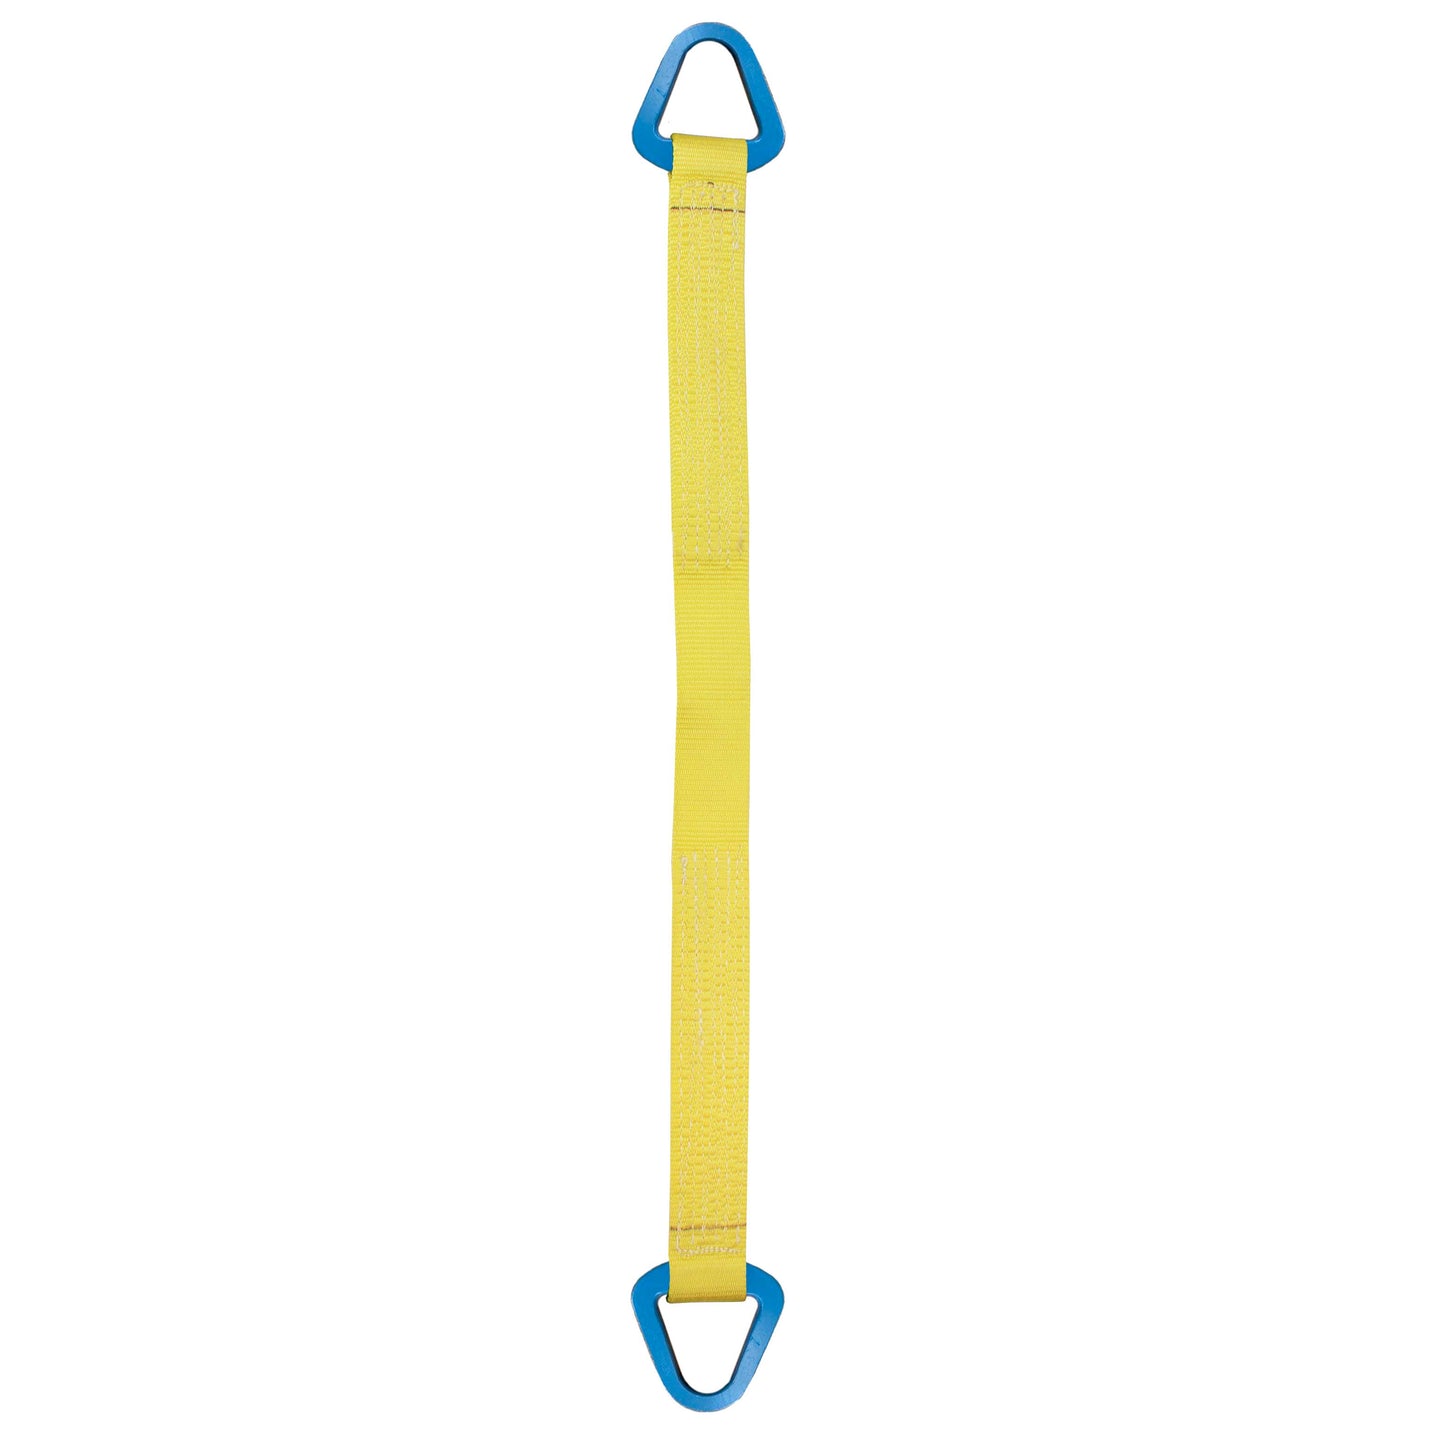 Nylon Lifting Sling Triangle 12 inch x 4 foot 2ply image 1 of 2